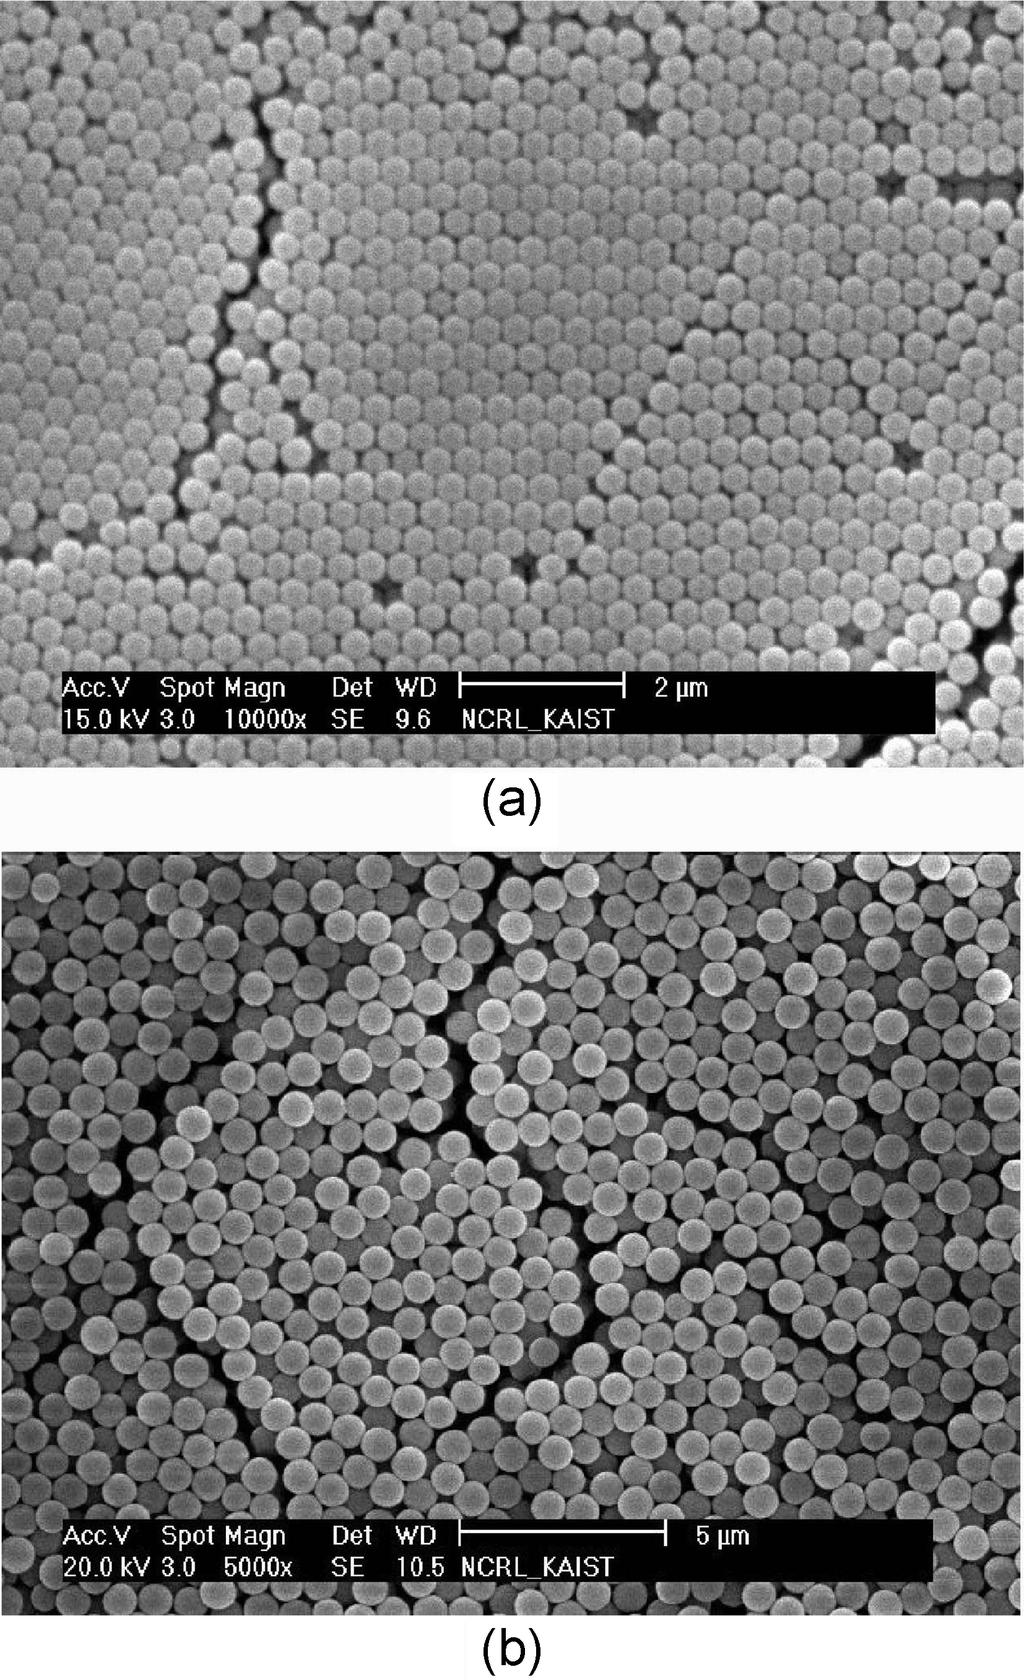 475 Journal of the Korean Ceramic Society - Fig 6 Fig 5 SEM micrographs of monodispersed spherical SiO obtained from (a) TEOS (mean size 360 nm, SD 38%) and (b) MTMS (mean size 8 nm, SD 3%) 14) Vol